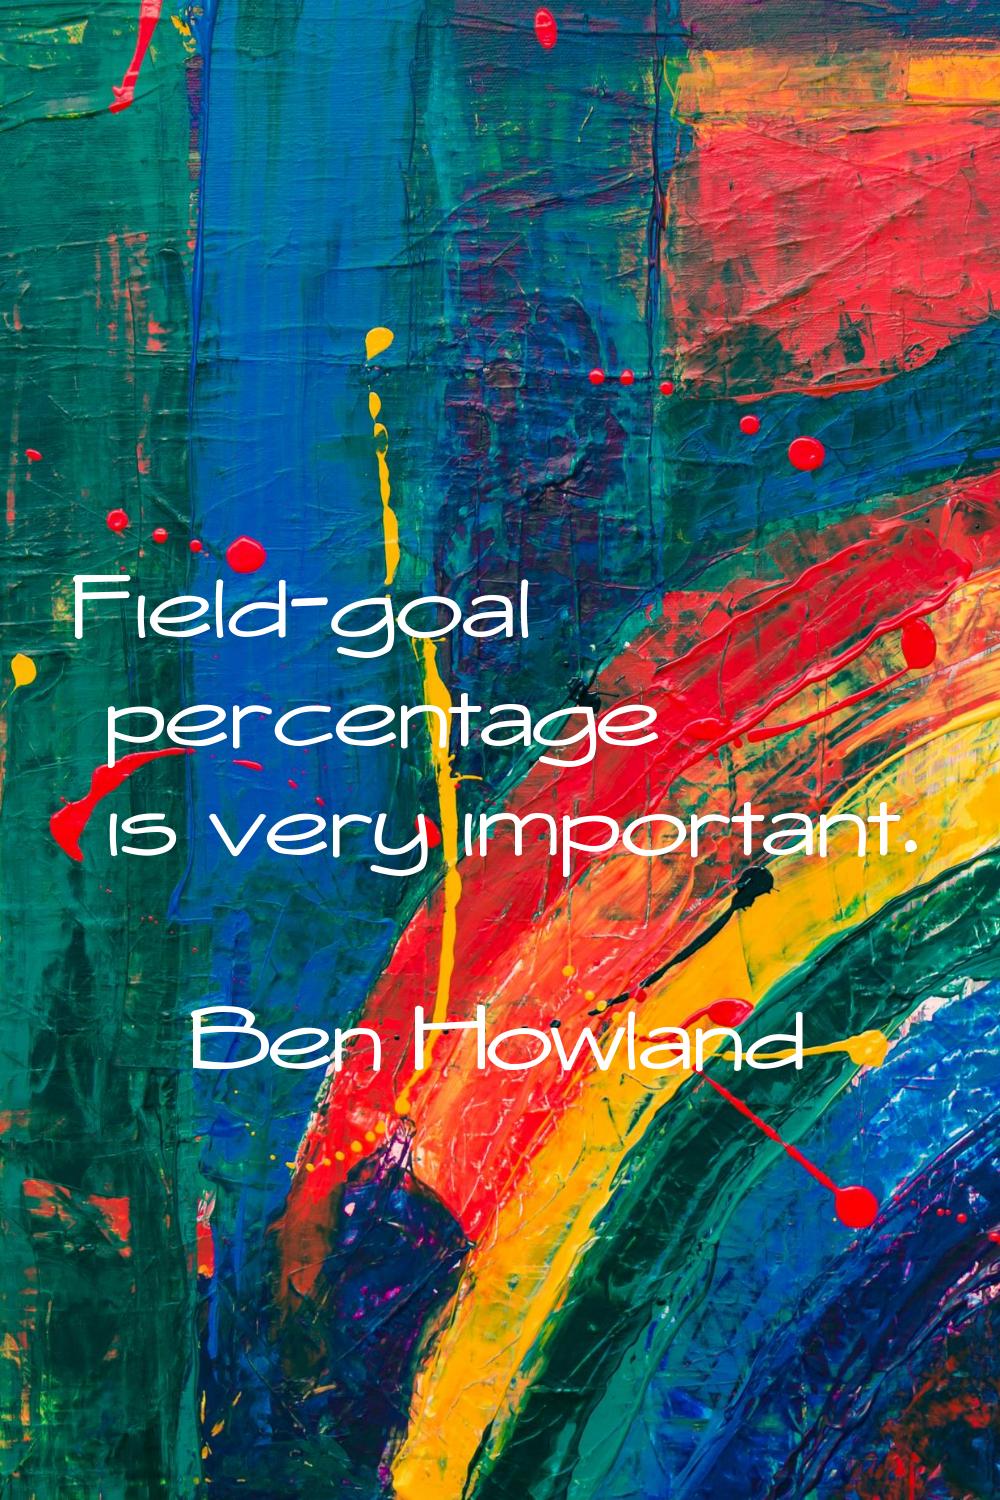 Field-goal percentage is very important.